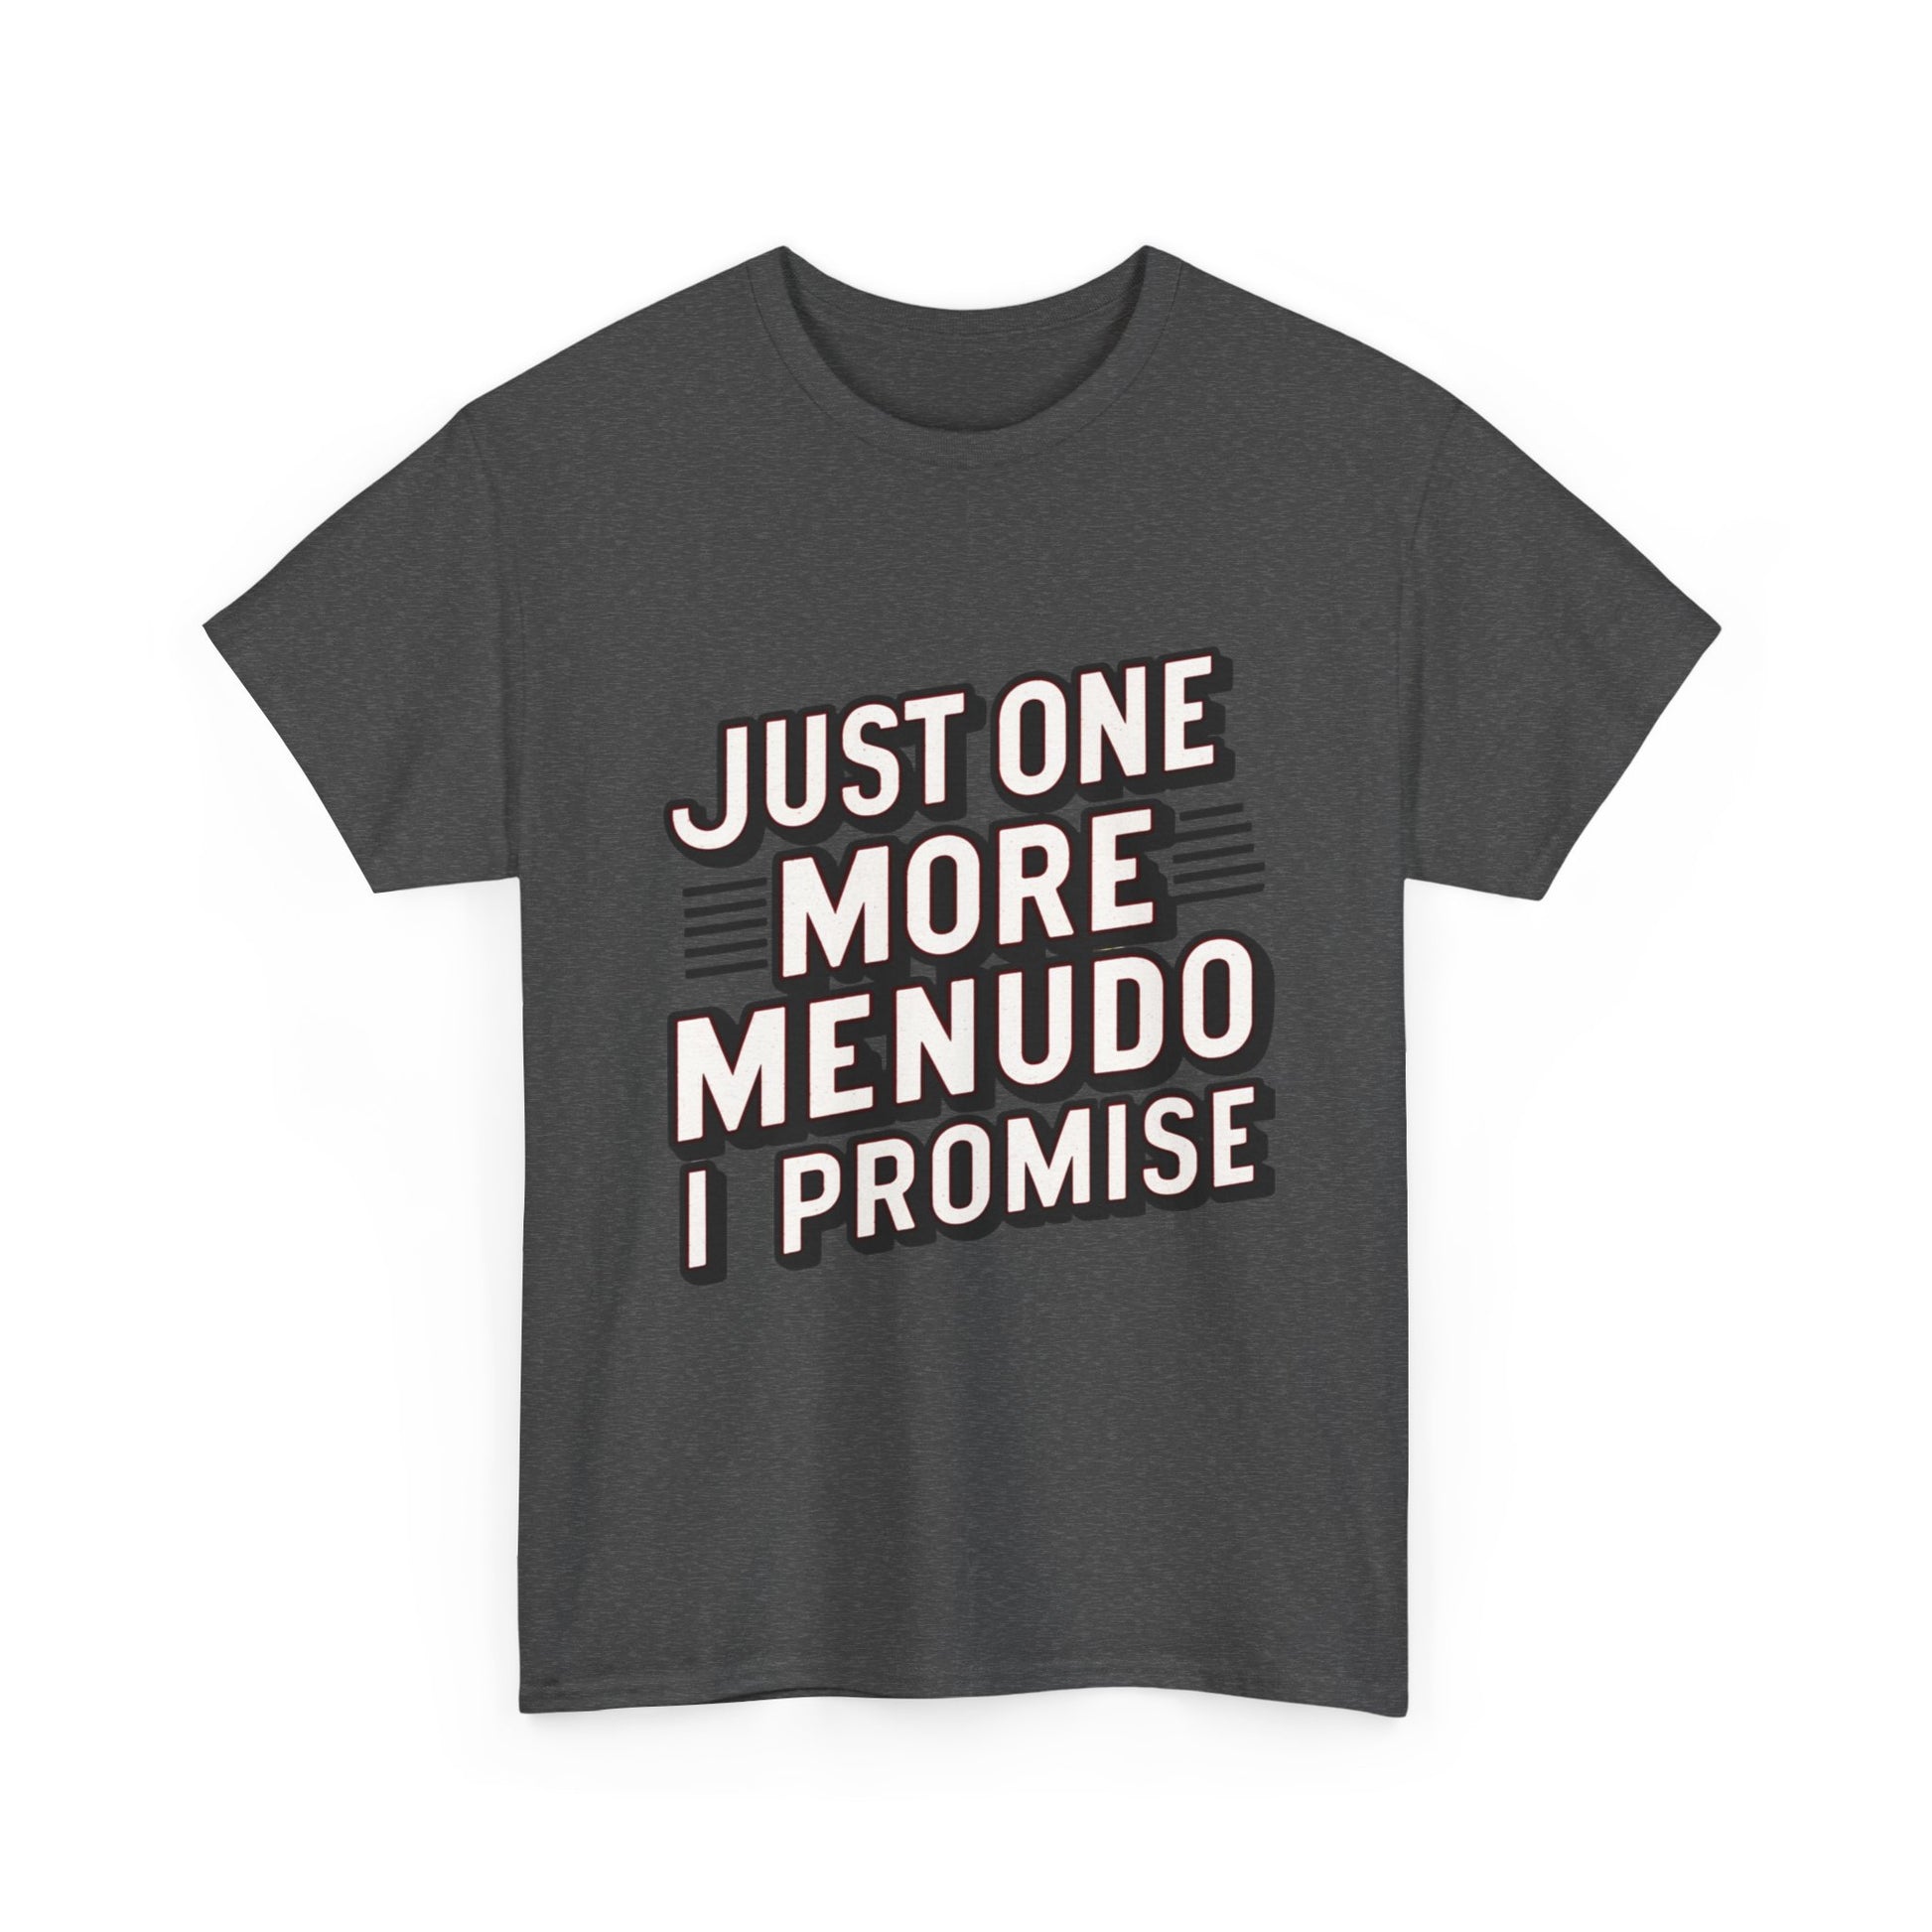 Just One More Menudo I Promise Mexican Food Graphic Unisex Heavy Cotton Tee Cotton Funny Humorous Graphic Soft Premium Unisex Men Women Dark Heather T-shirt Birthday Gift-24